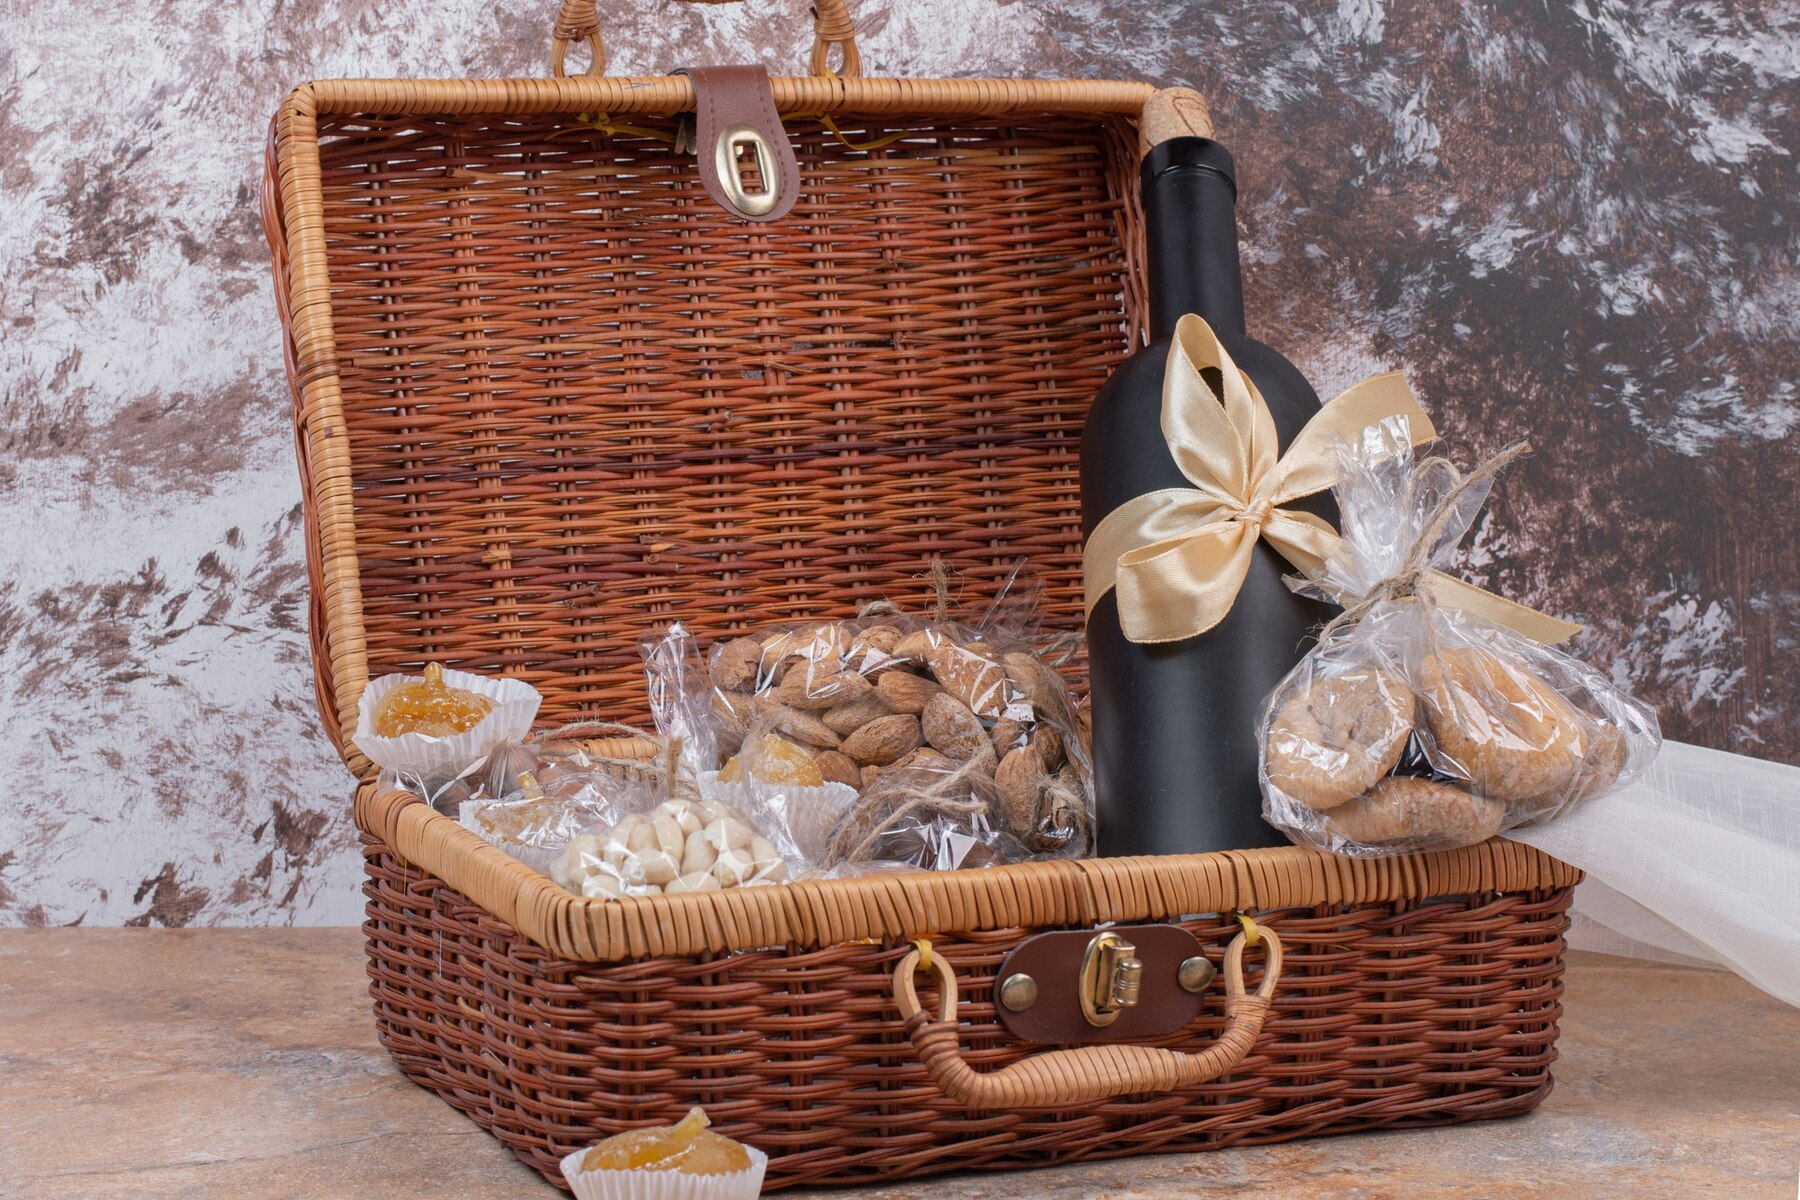 Basket Gift Ideas For Husband On Valentine's Day